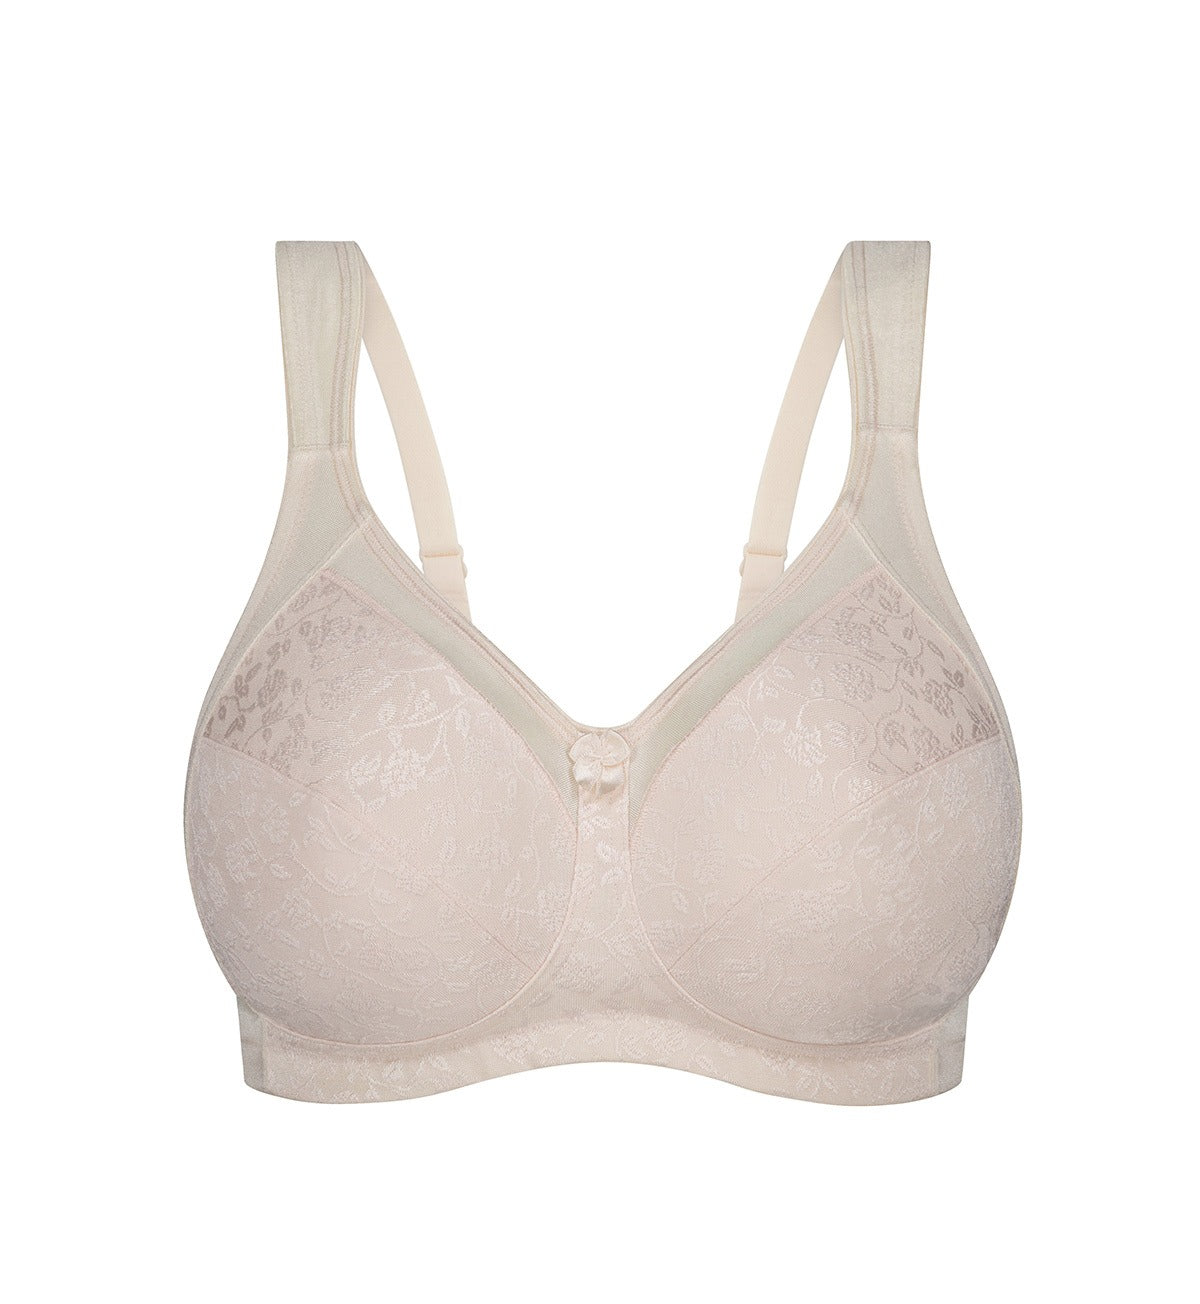 Triumph Endless Comfort Soft Cup Wire-free Bra - White